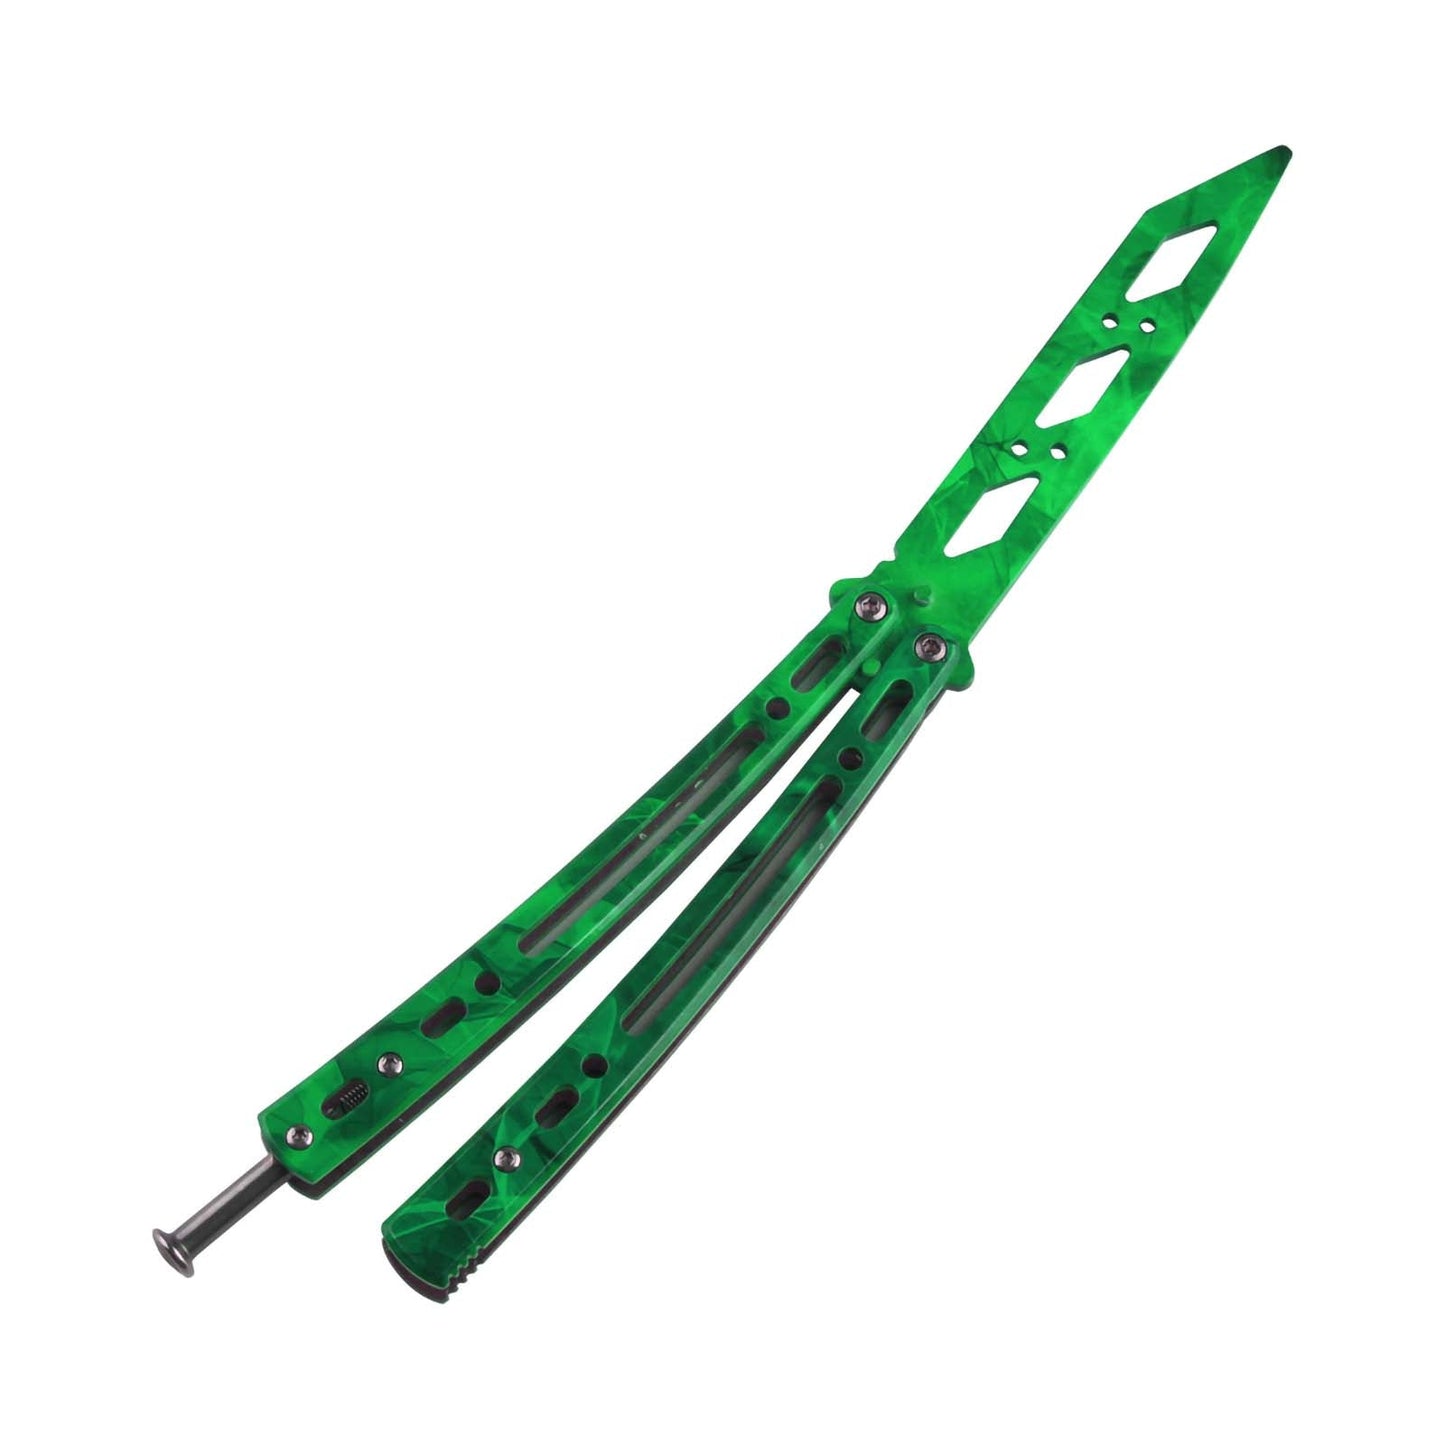 Andux Balisong Training Tool CS/HDD29 Green(ONLY Available in EU Countries)